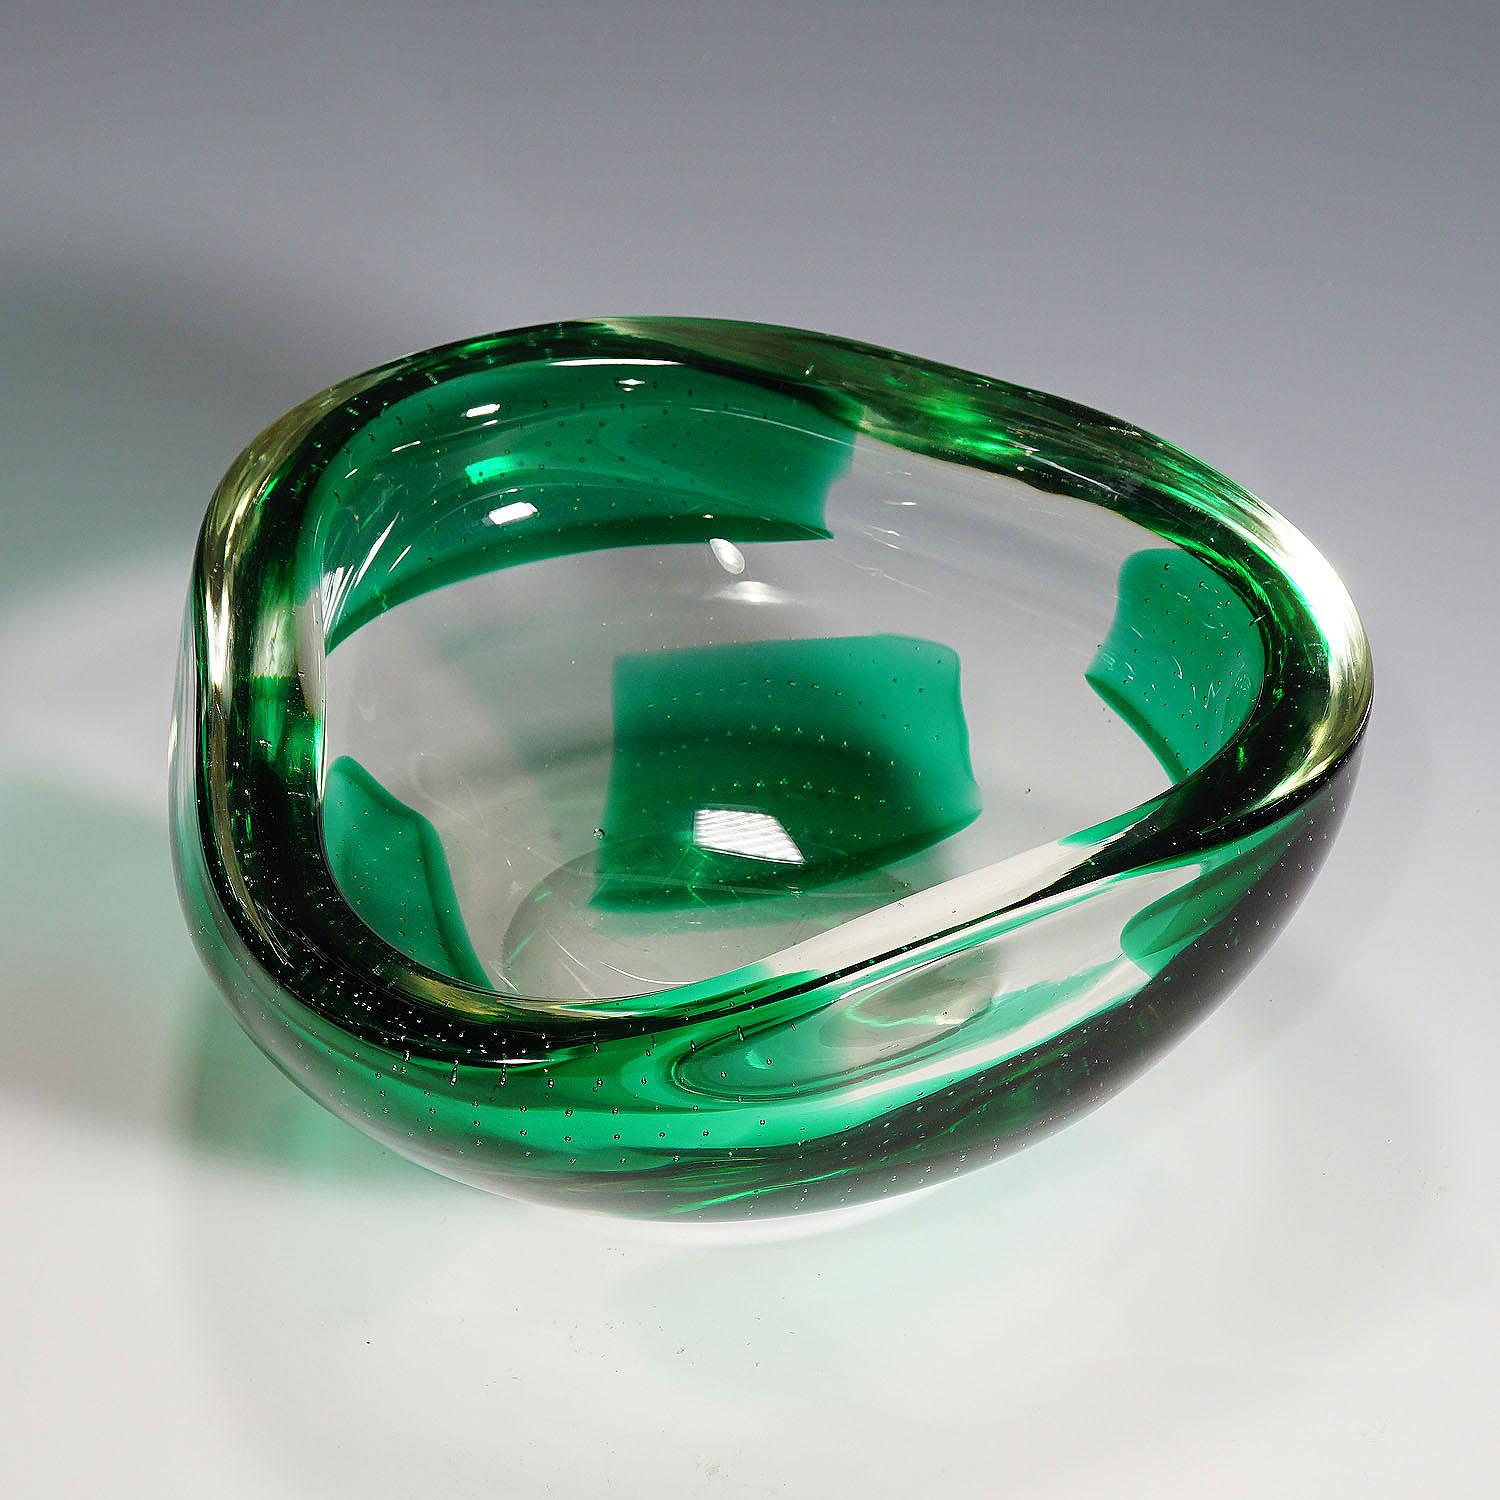 Mid-Century Modern Dino Martens for Aureliano Toso Coppa Pesante Glass Bowl, 1940s For Sale